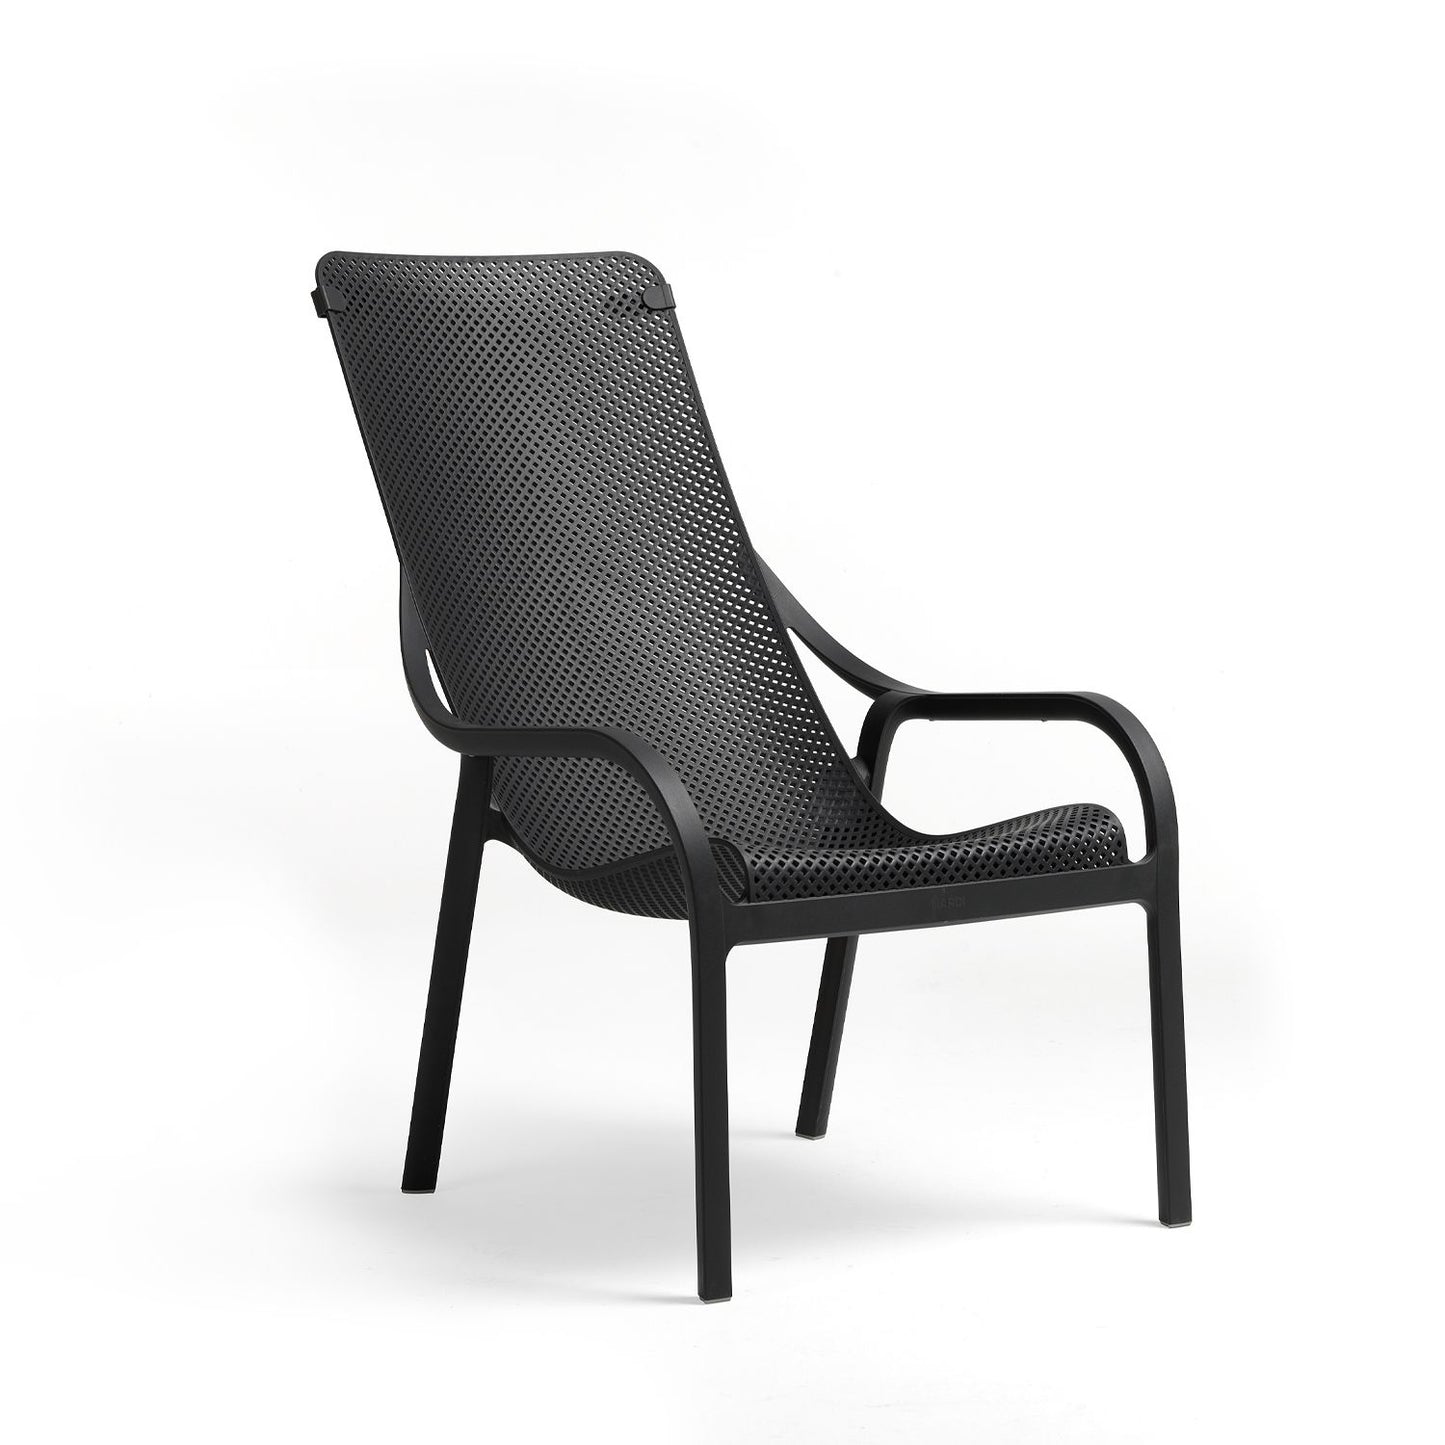 Net Lounge Chair By Nardi - Anthracite